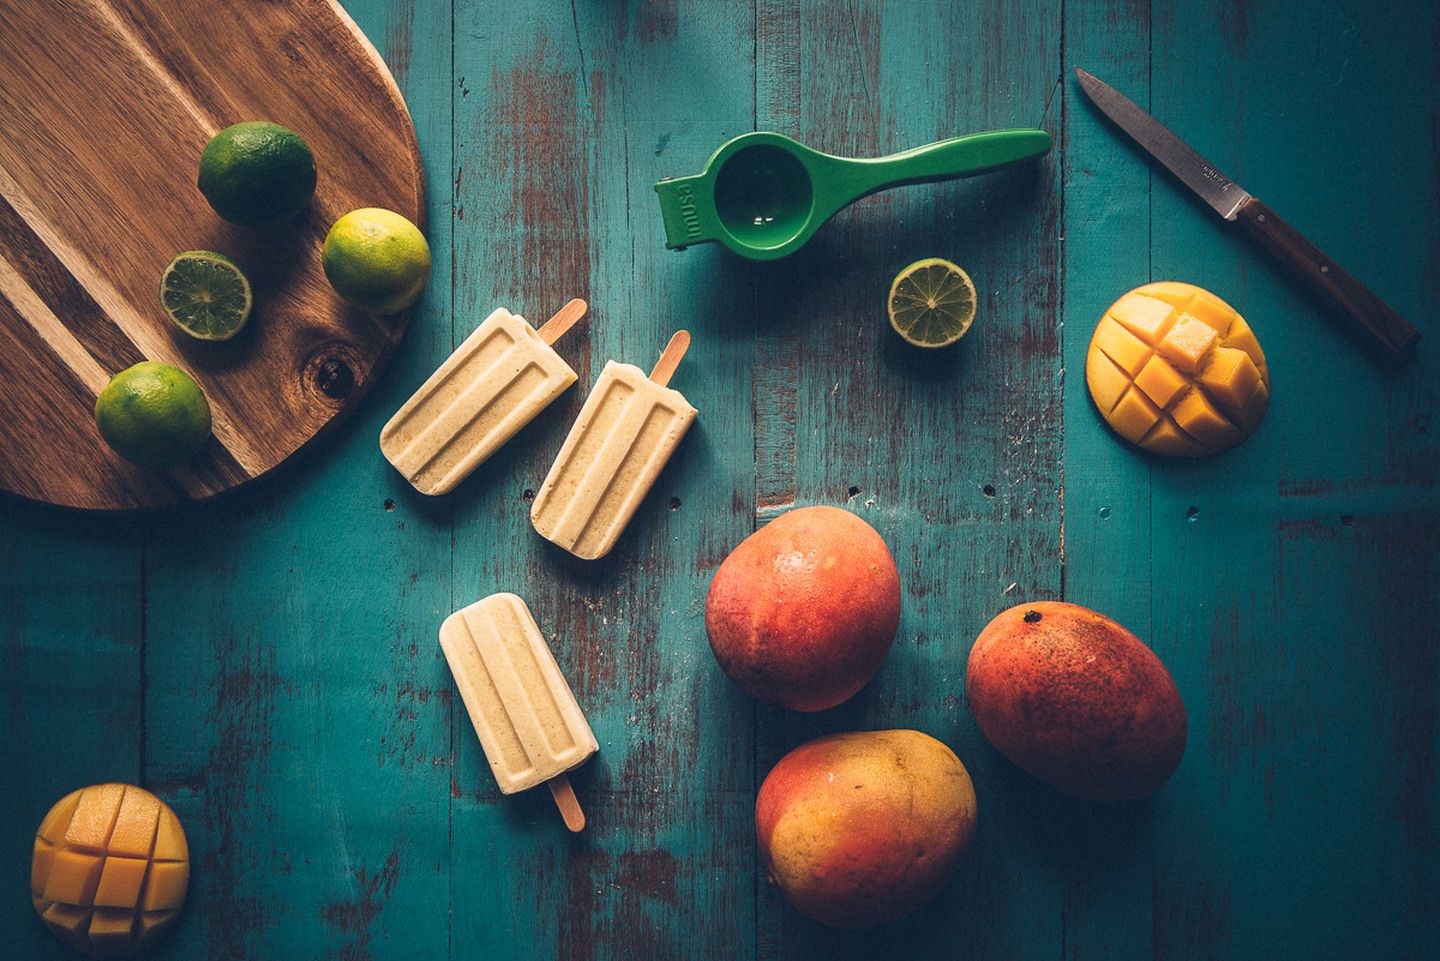 Popsicle flatlay surrounded by mangoes and limes.